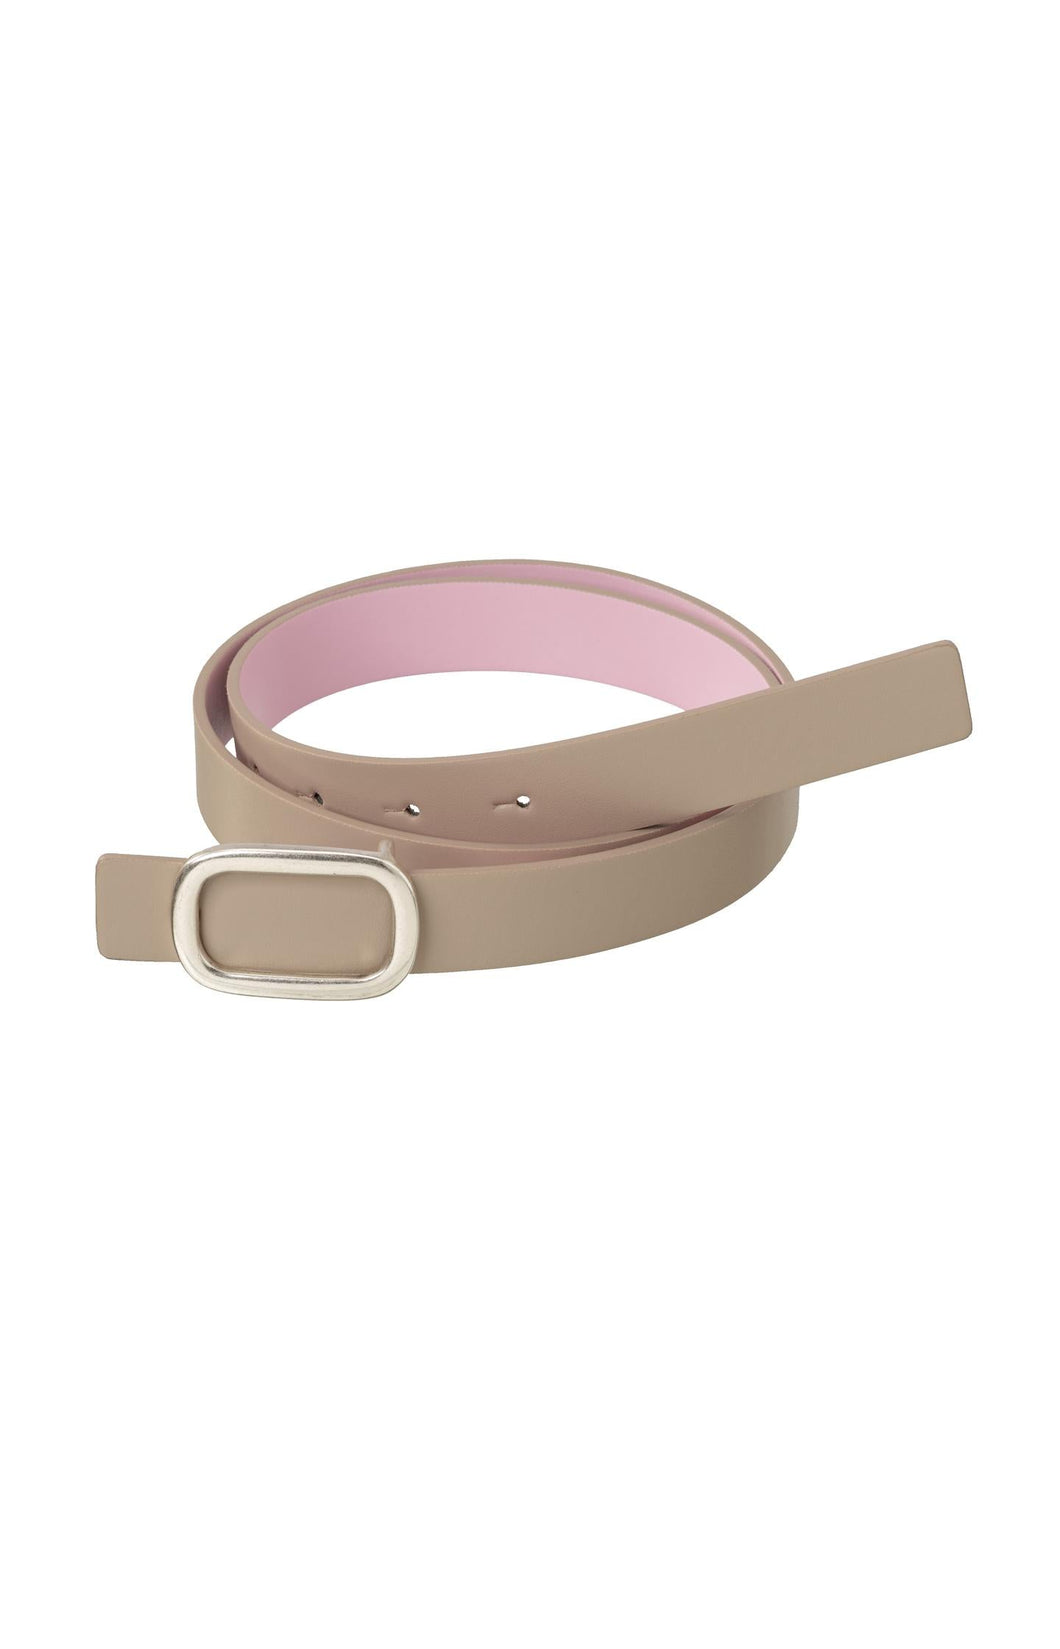 Reversible belt with square buckle and colored side - Phalaenopsis Pink - Type: product